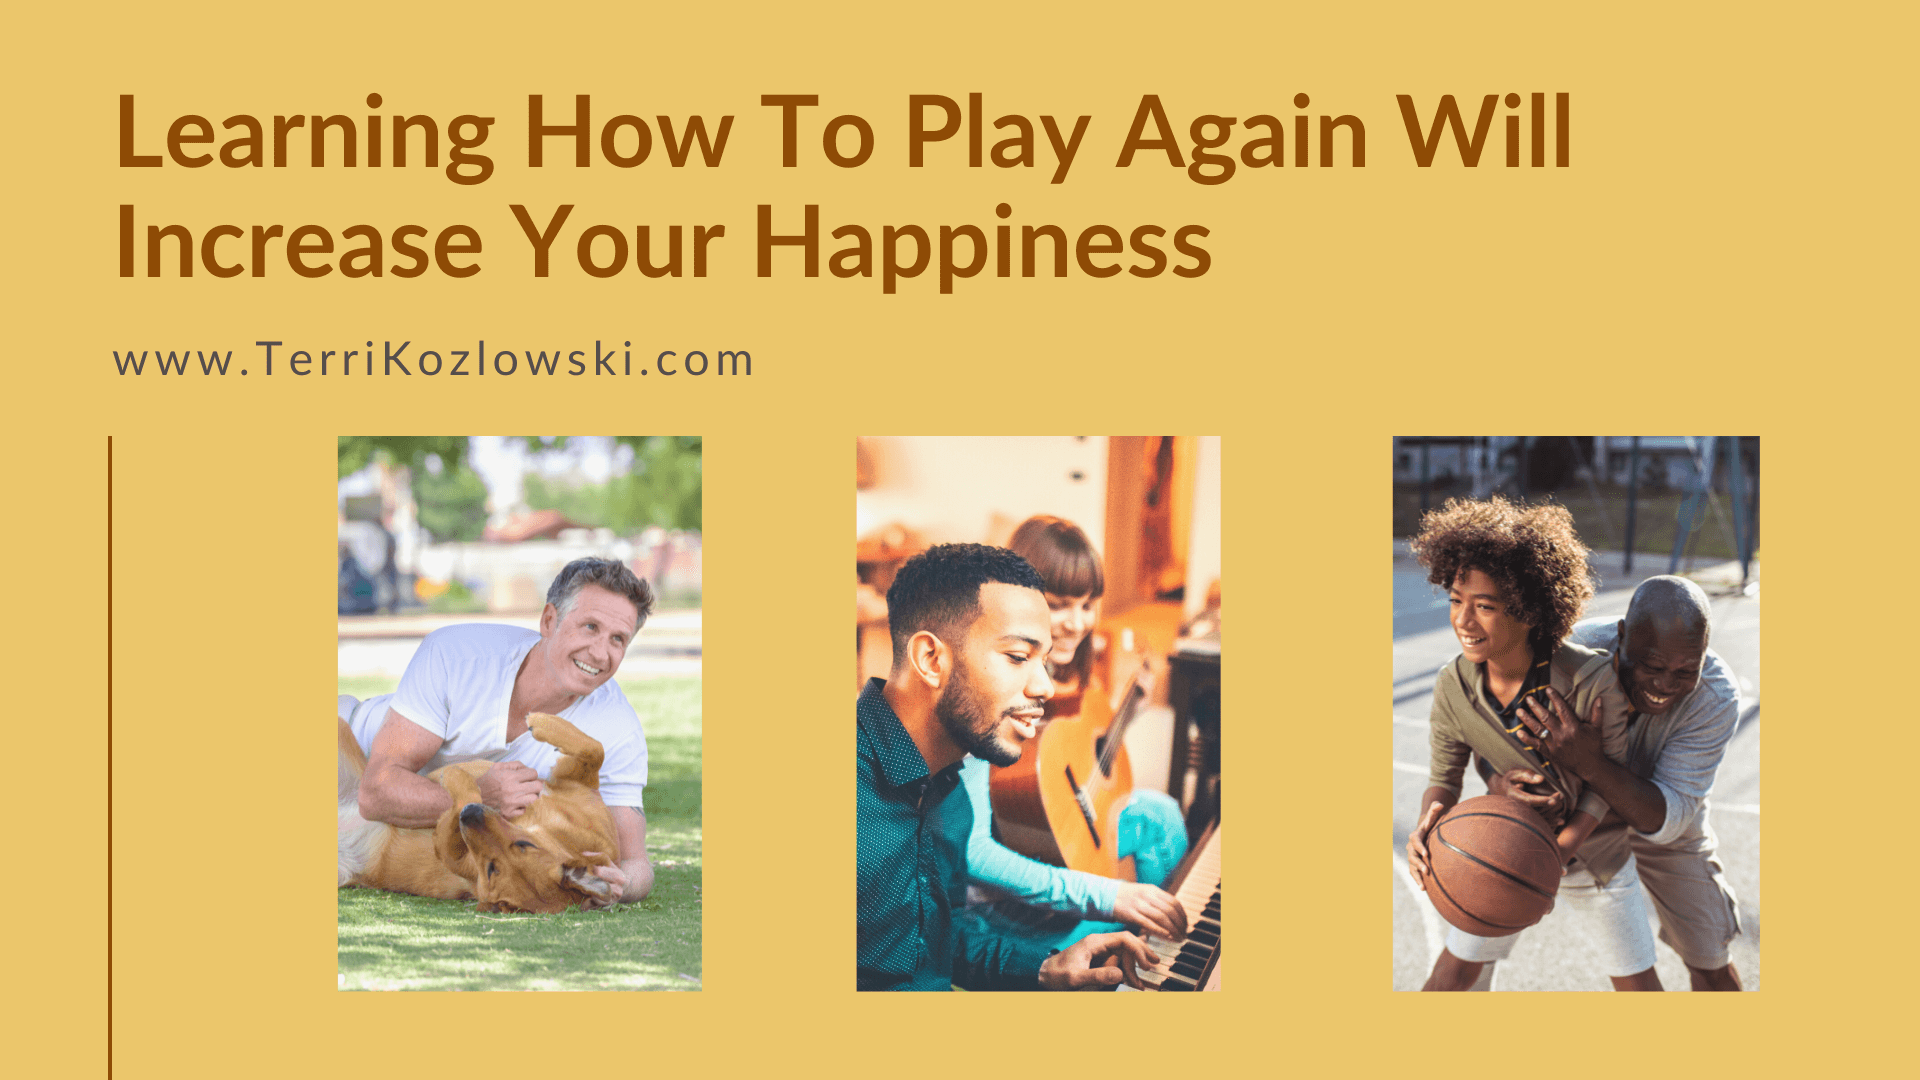 Learning How To Play Again Will Increase Your Happiness